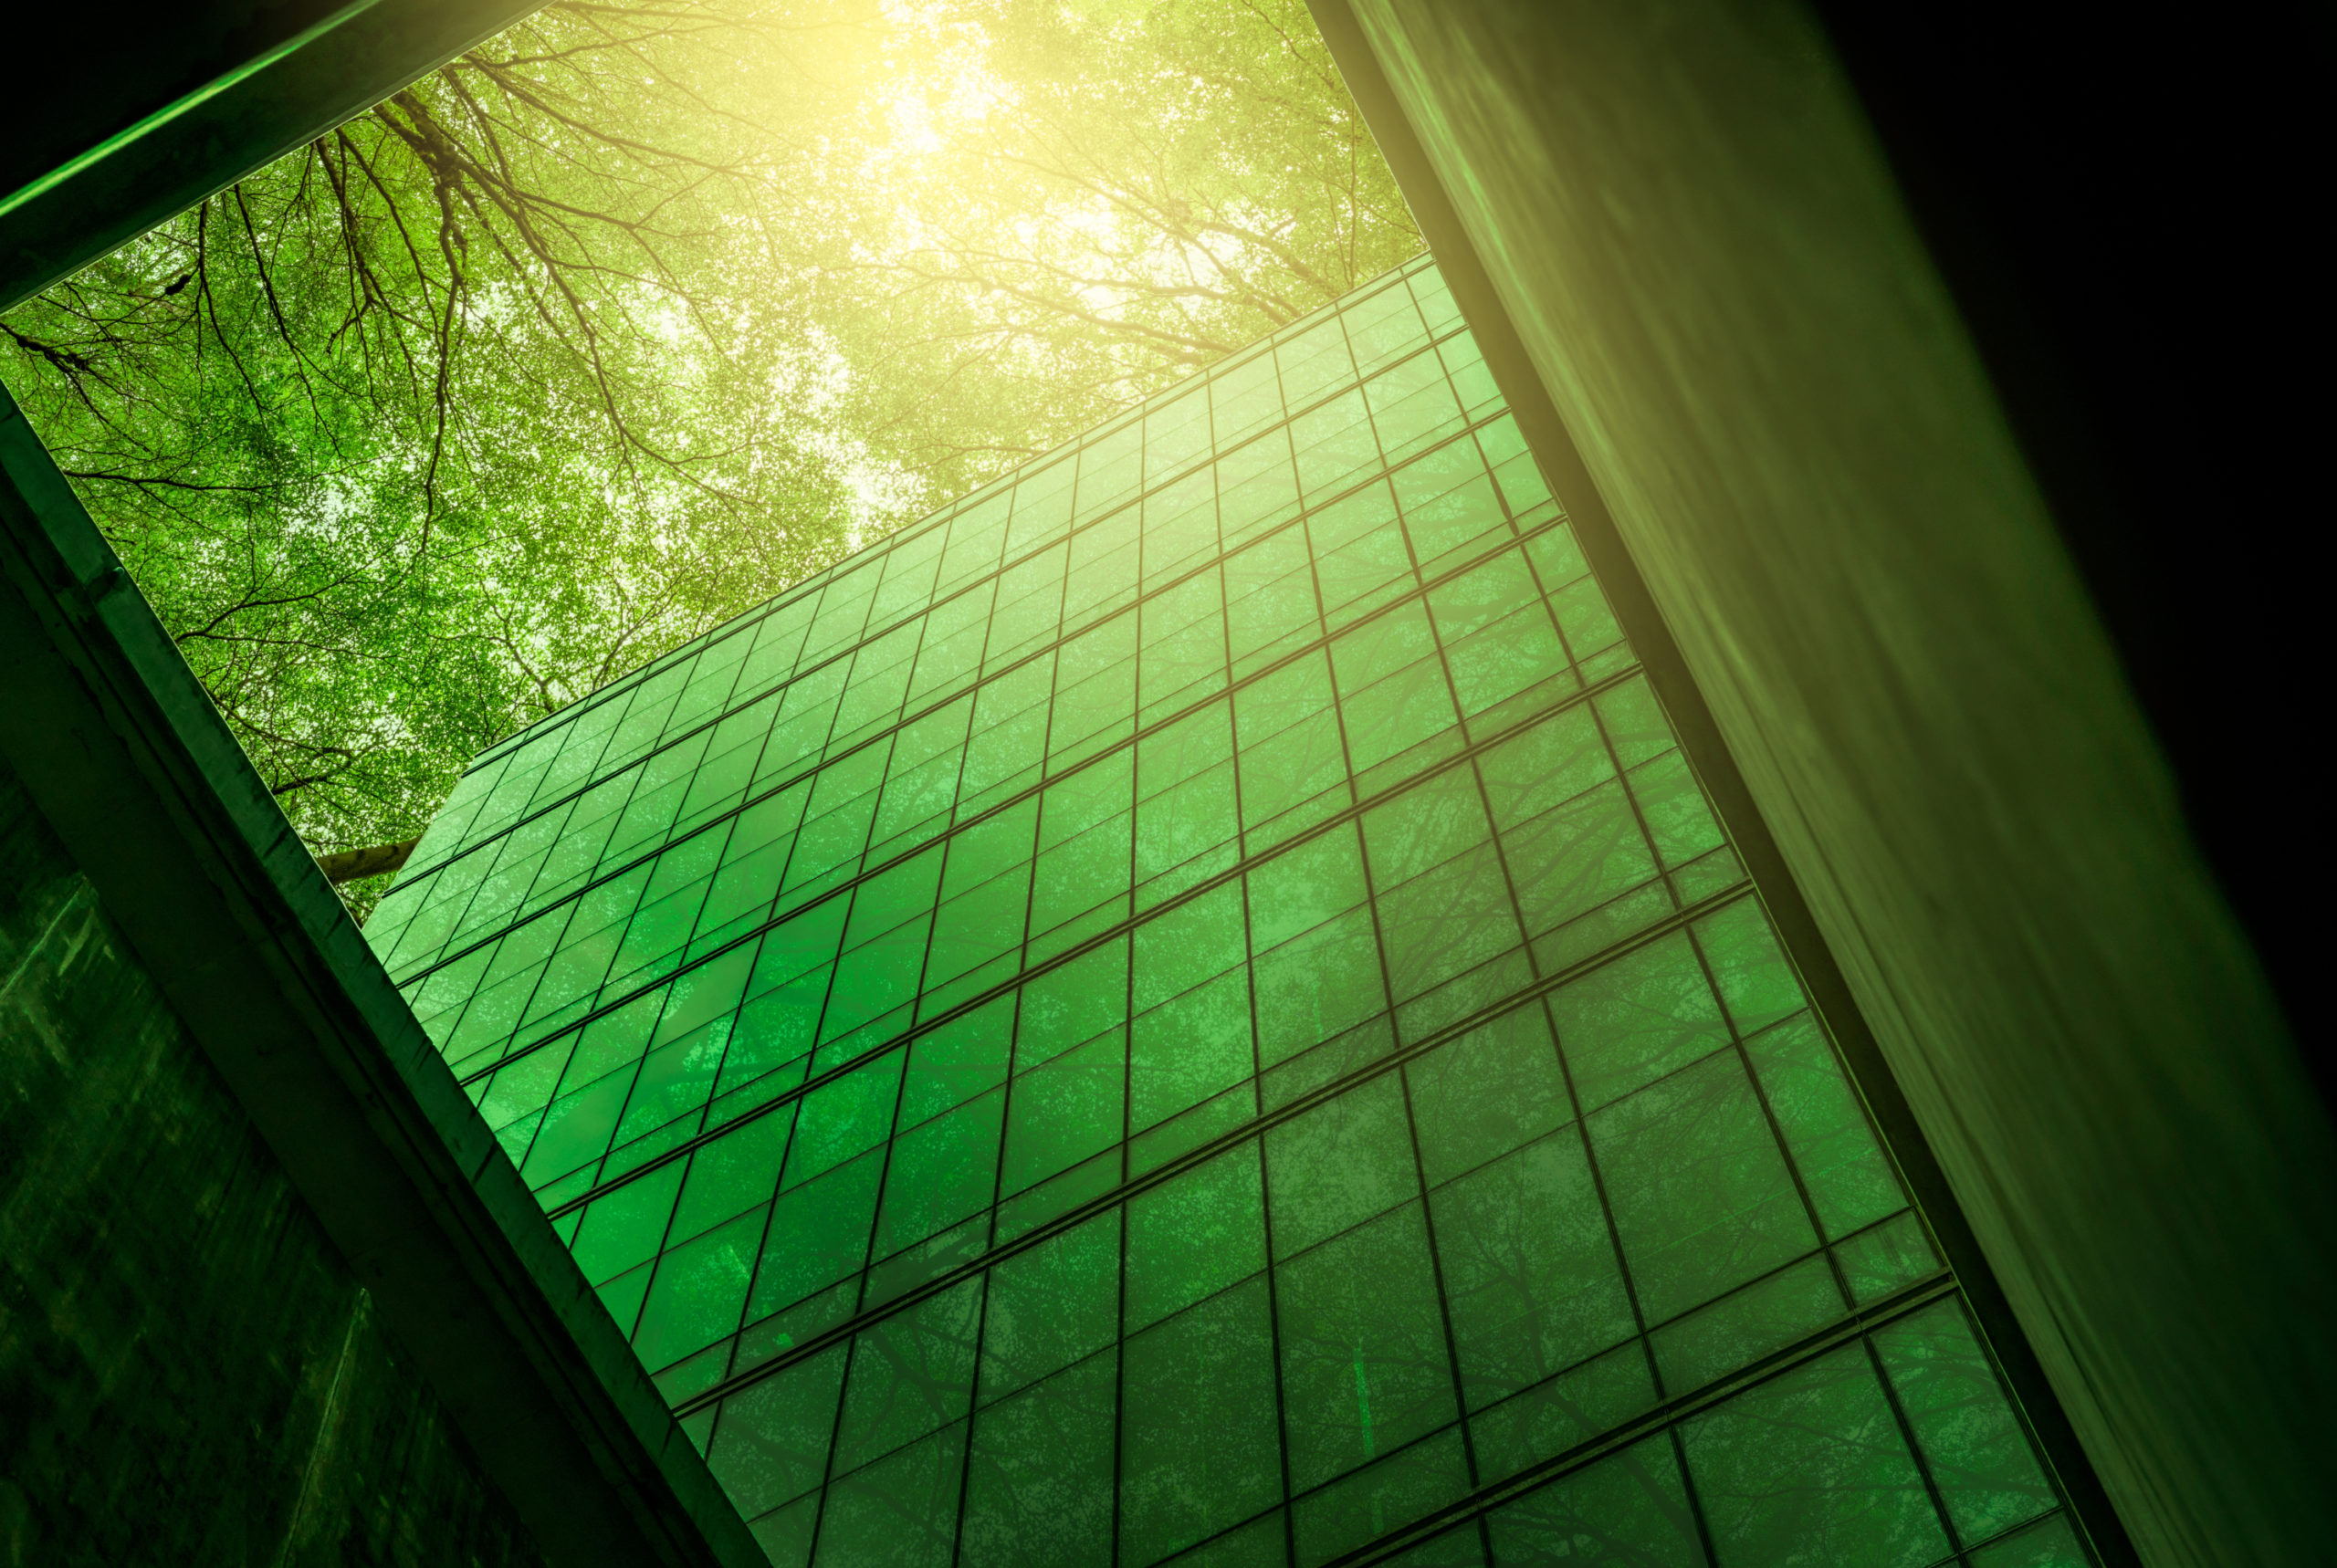 Glass buildings surrounded by trees and sunlight